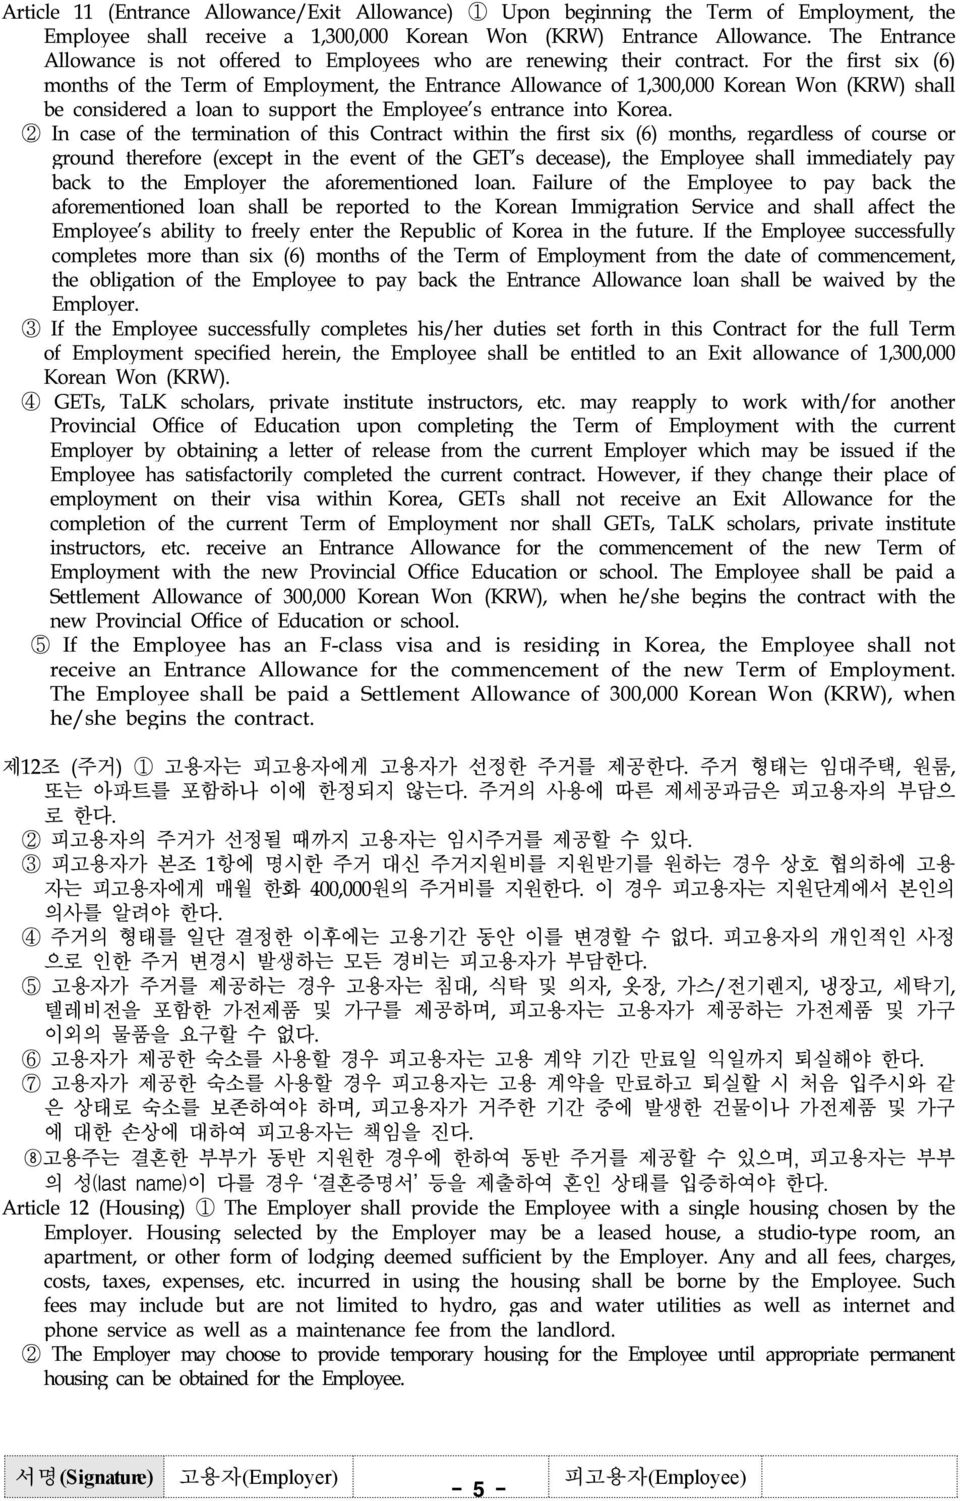 For the first six (6) months of the Term of Employment, the Entrance Allowance of 1,300,000 Korean Won (KRW) shall be considered a loan to support the Employee's entrance into Korea.